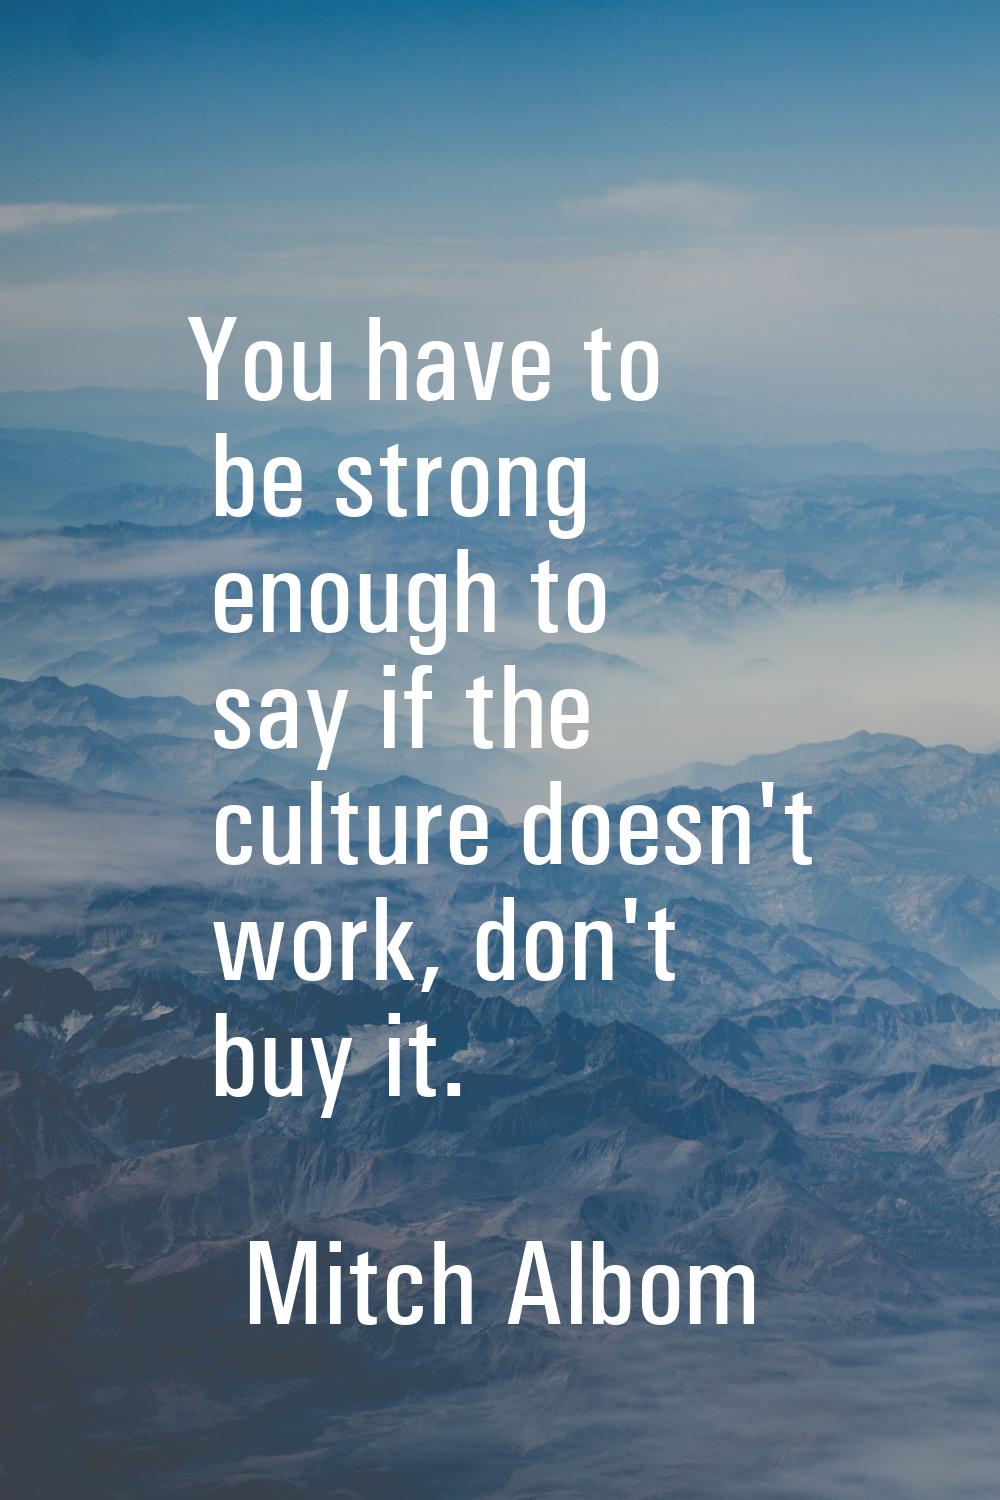 You have to be strong enough to say if the culture doesn't work, don't buy it.